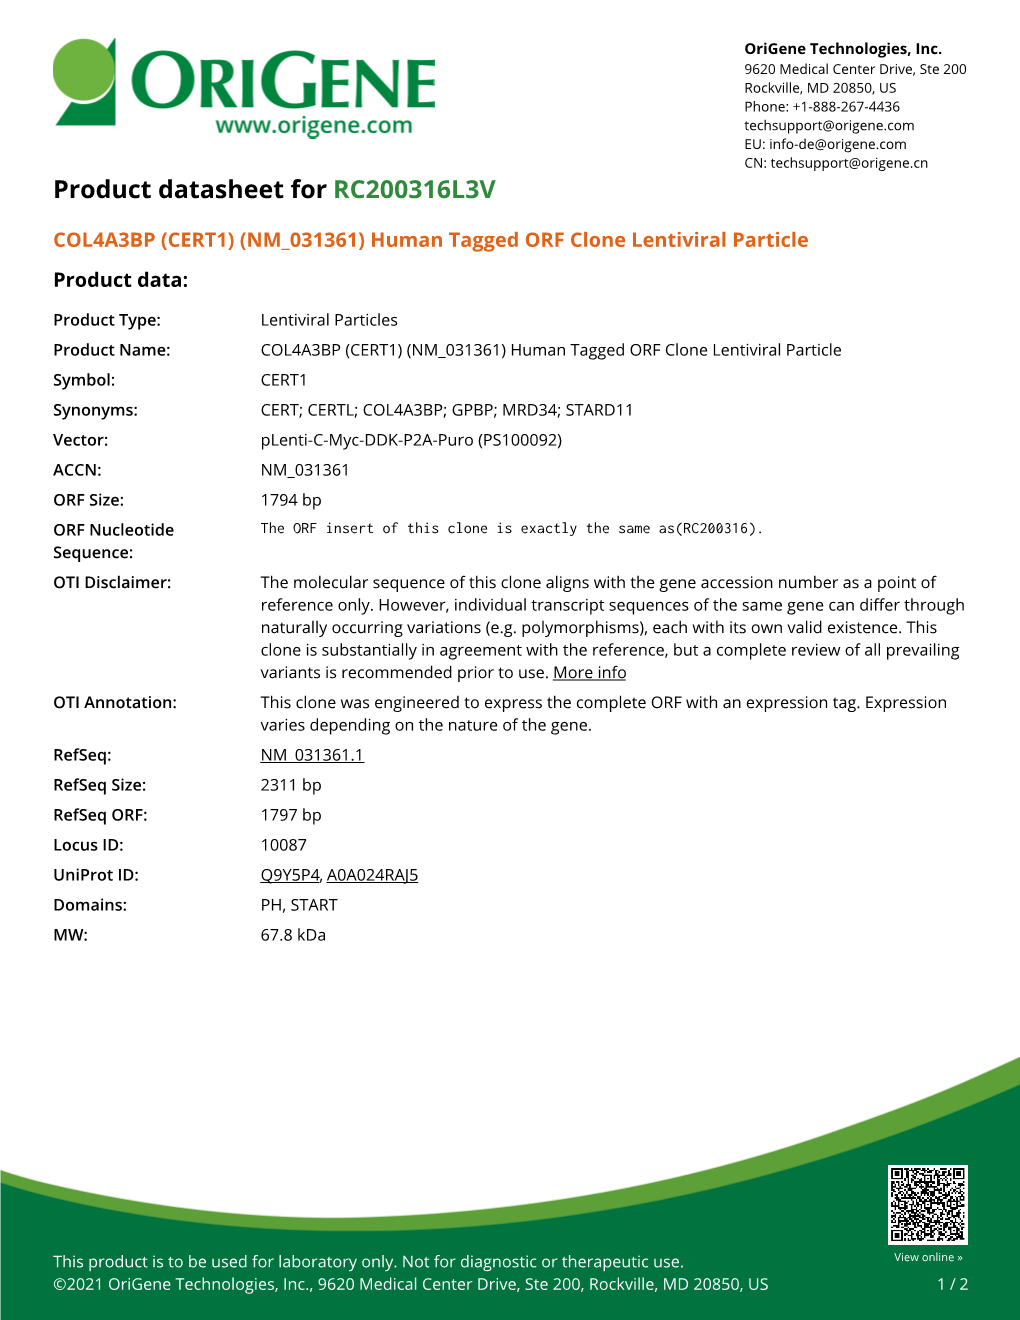 COL4A3BP (CERT1) (NM 031361) Human Tagged ORF Clone Lentiviral Particle Product Data